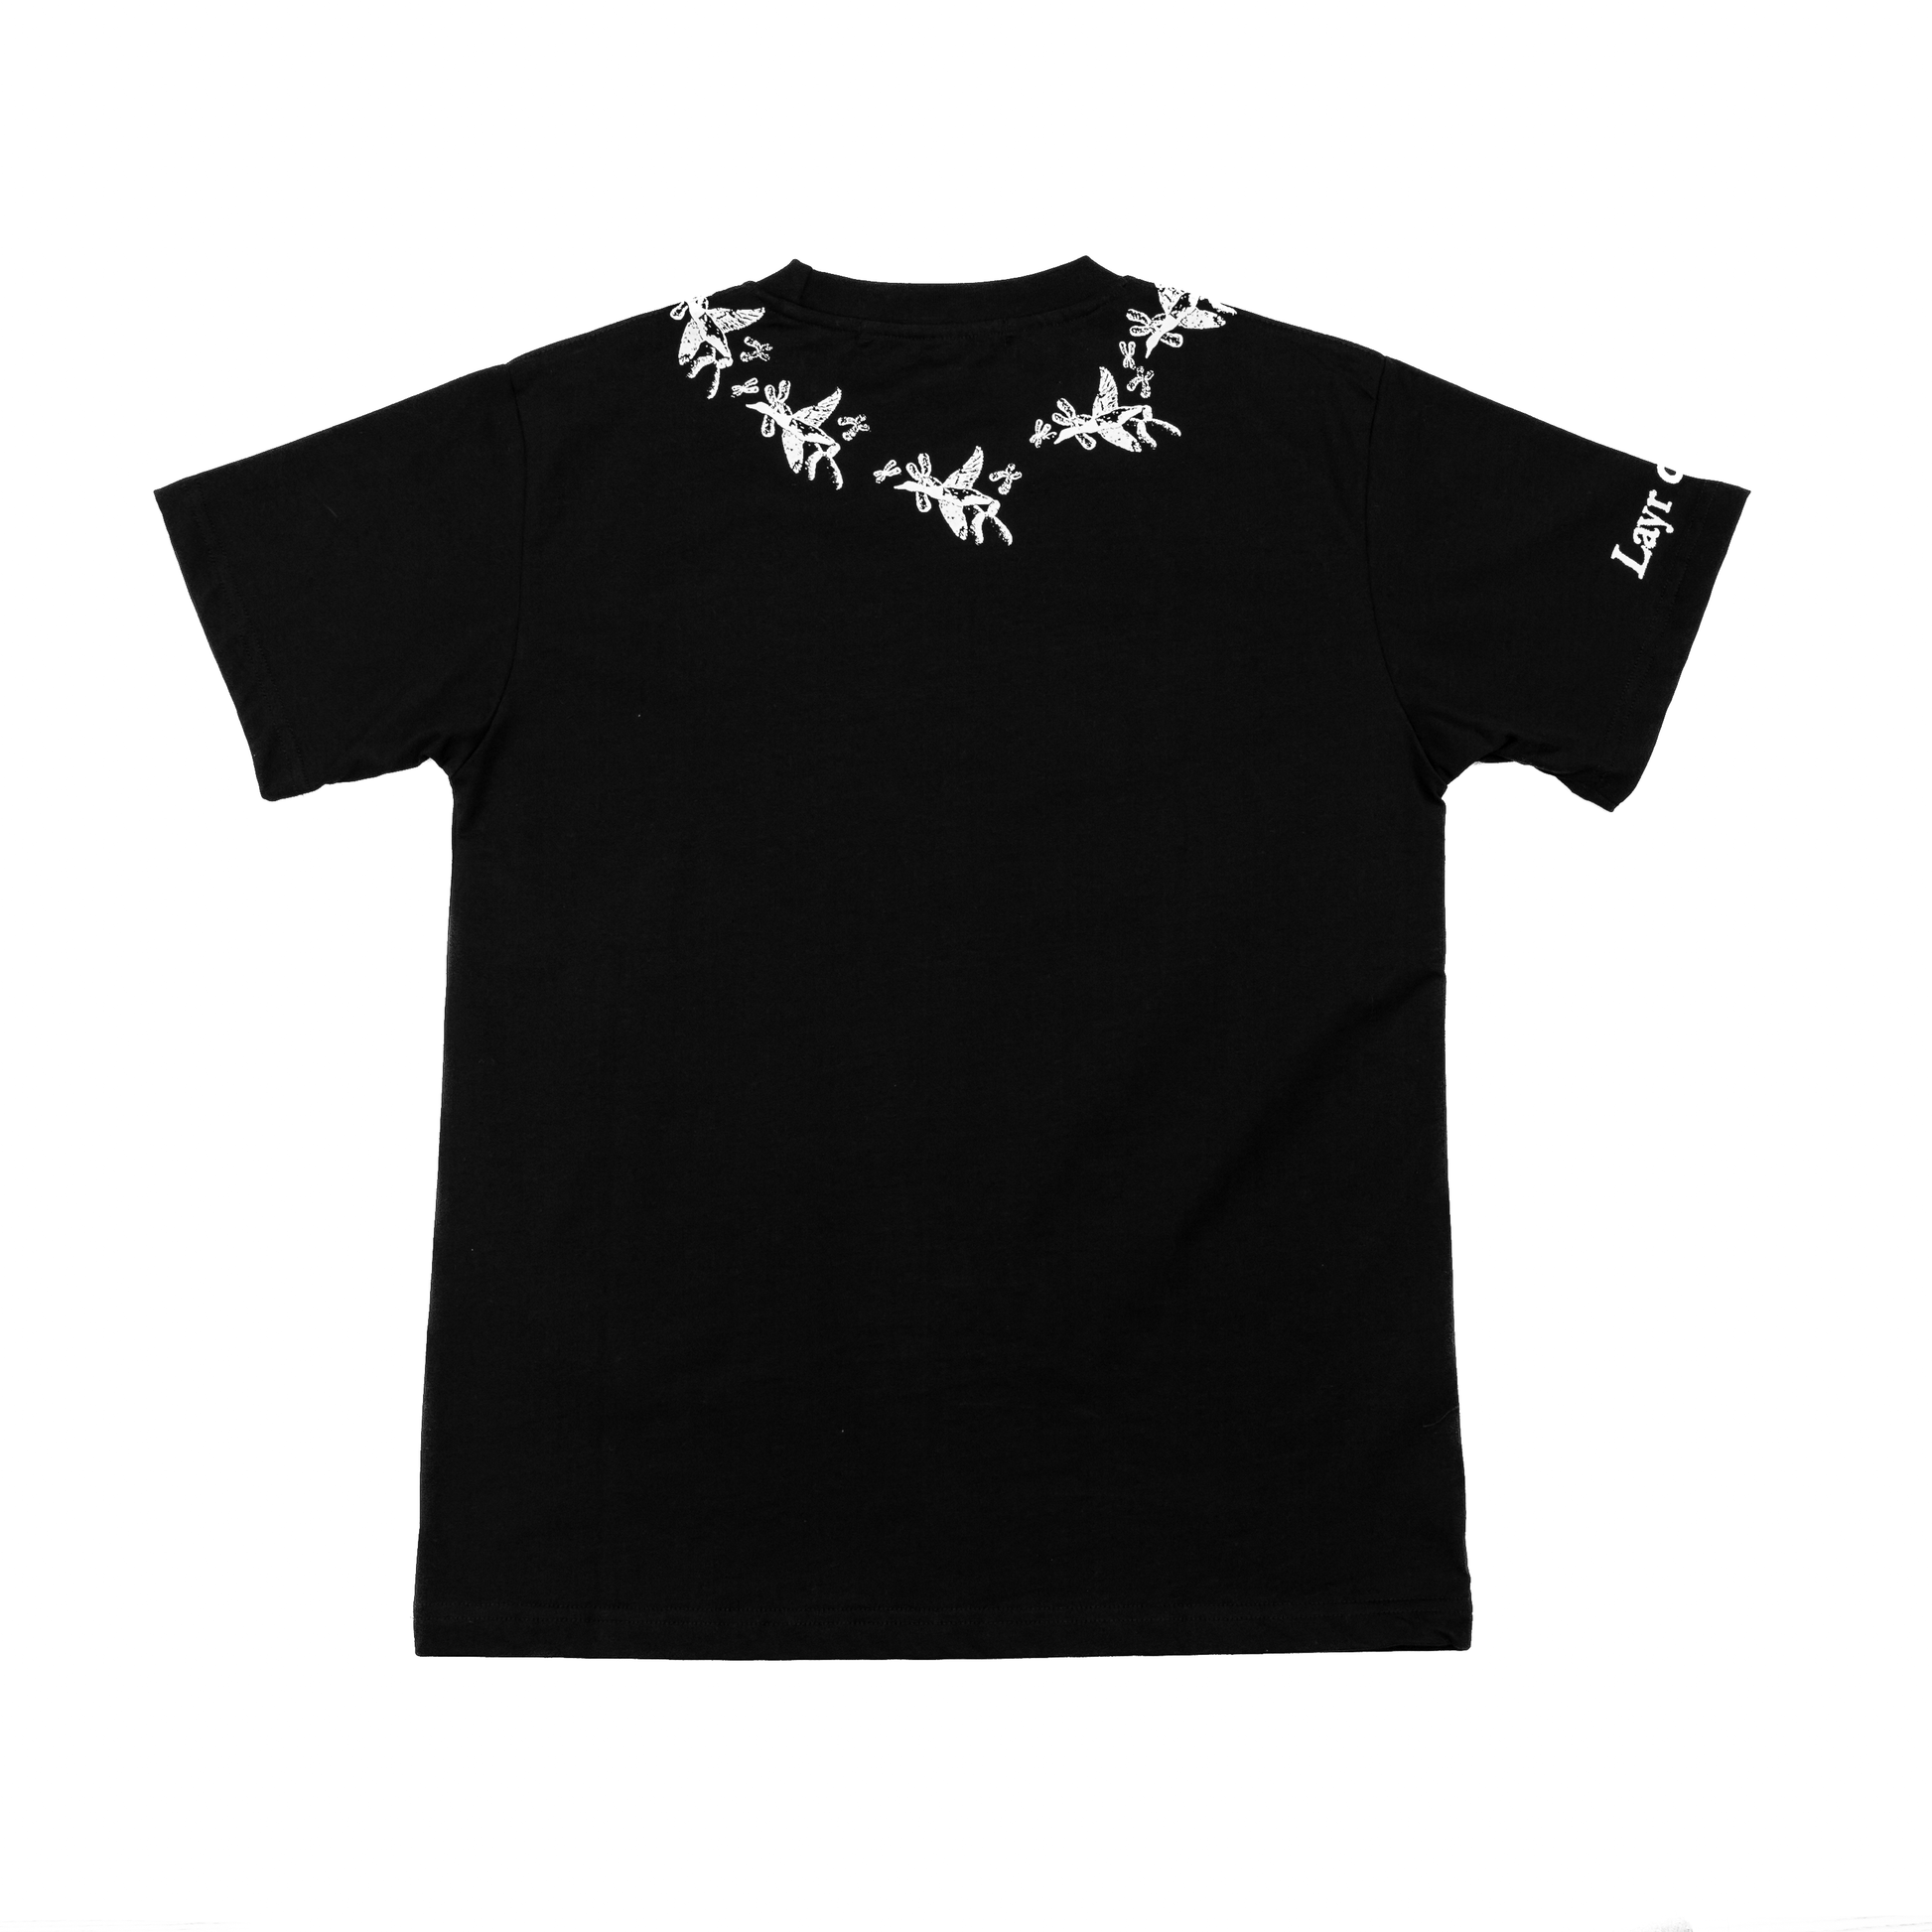 Flying Duck Neck Tee, Black - Layr Official